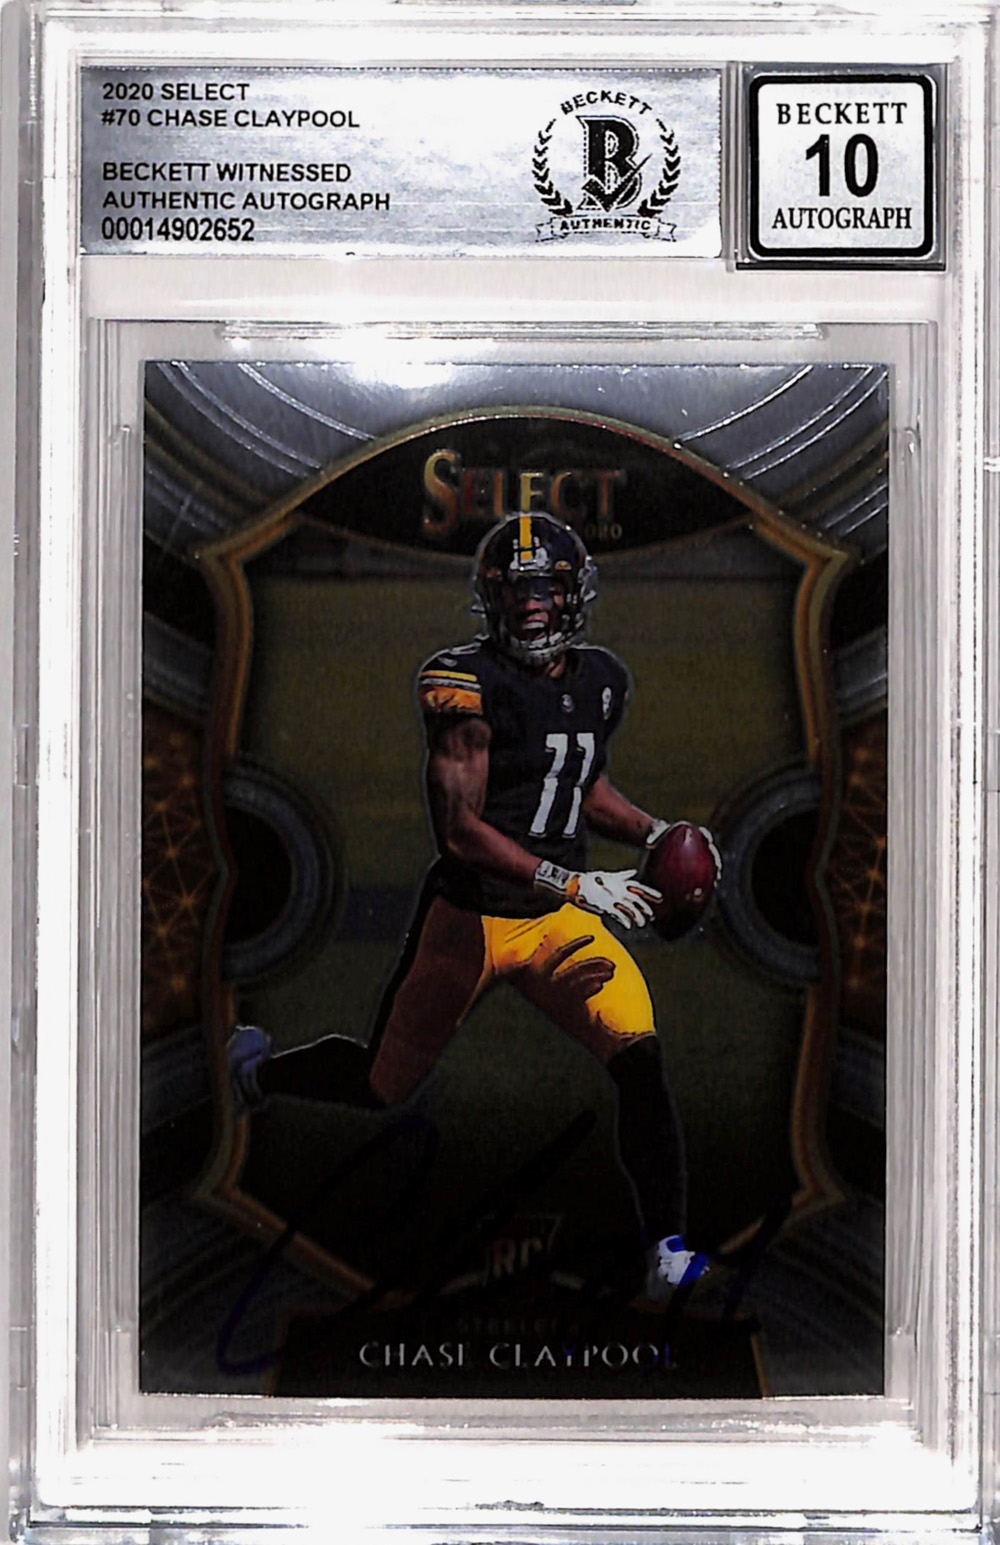 Chase Claypool Signed 2020 Panini Select #70 Rookie Card Beckett Slab